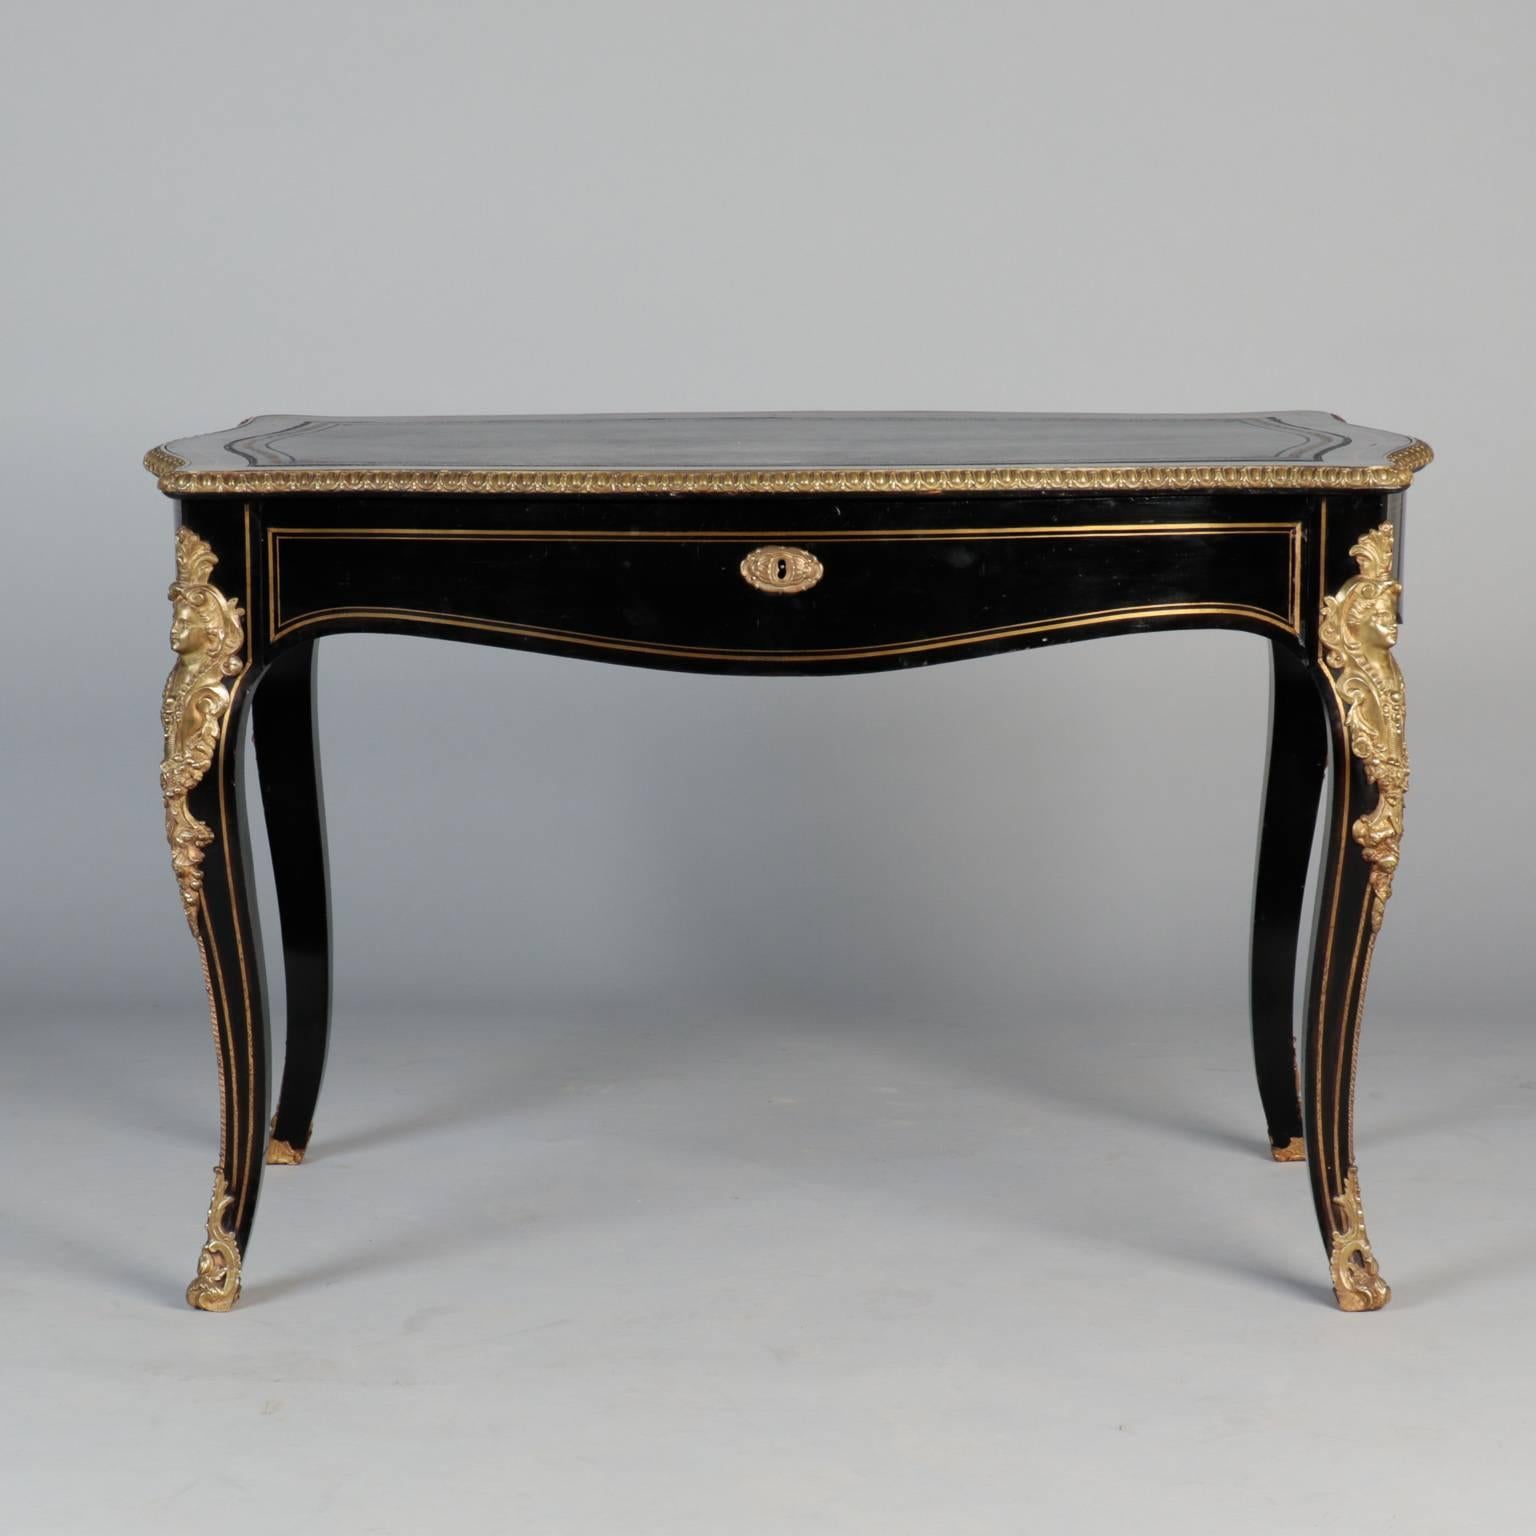 Regency style writing desk in ebonised finish with locking center drawer and leather top, circa 1880. This piece features classic French lines and elaborately detailed gilded ornamental female bust and foot cap on each leg. Curved apron with gilded